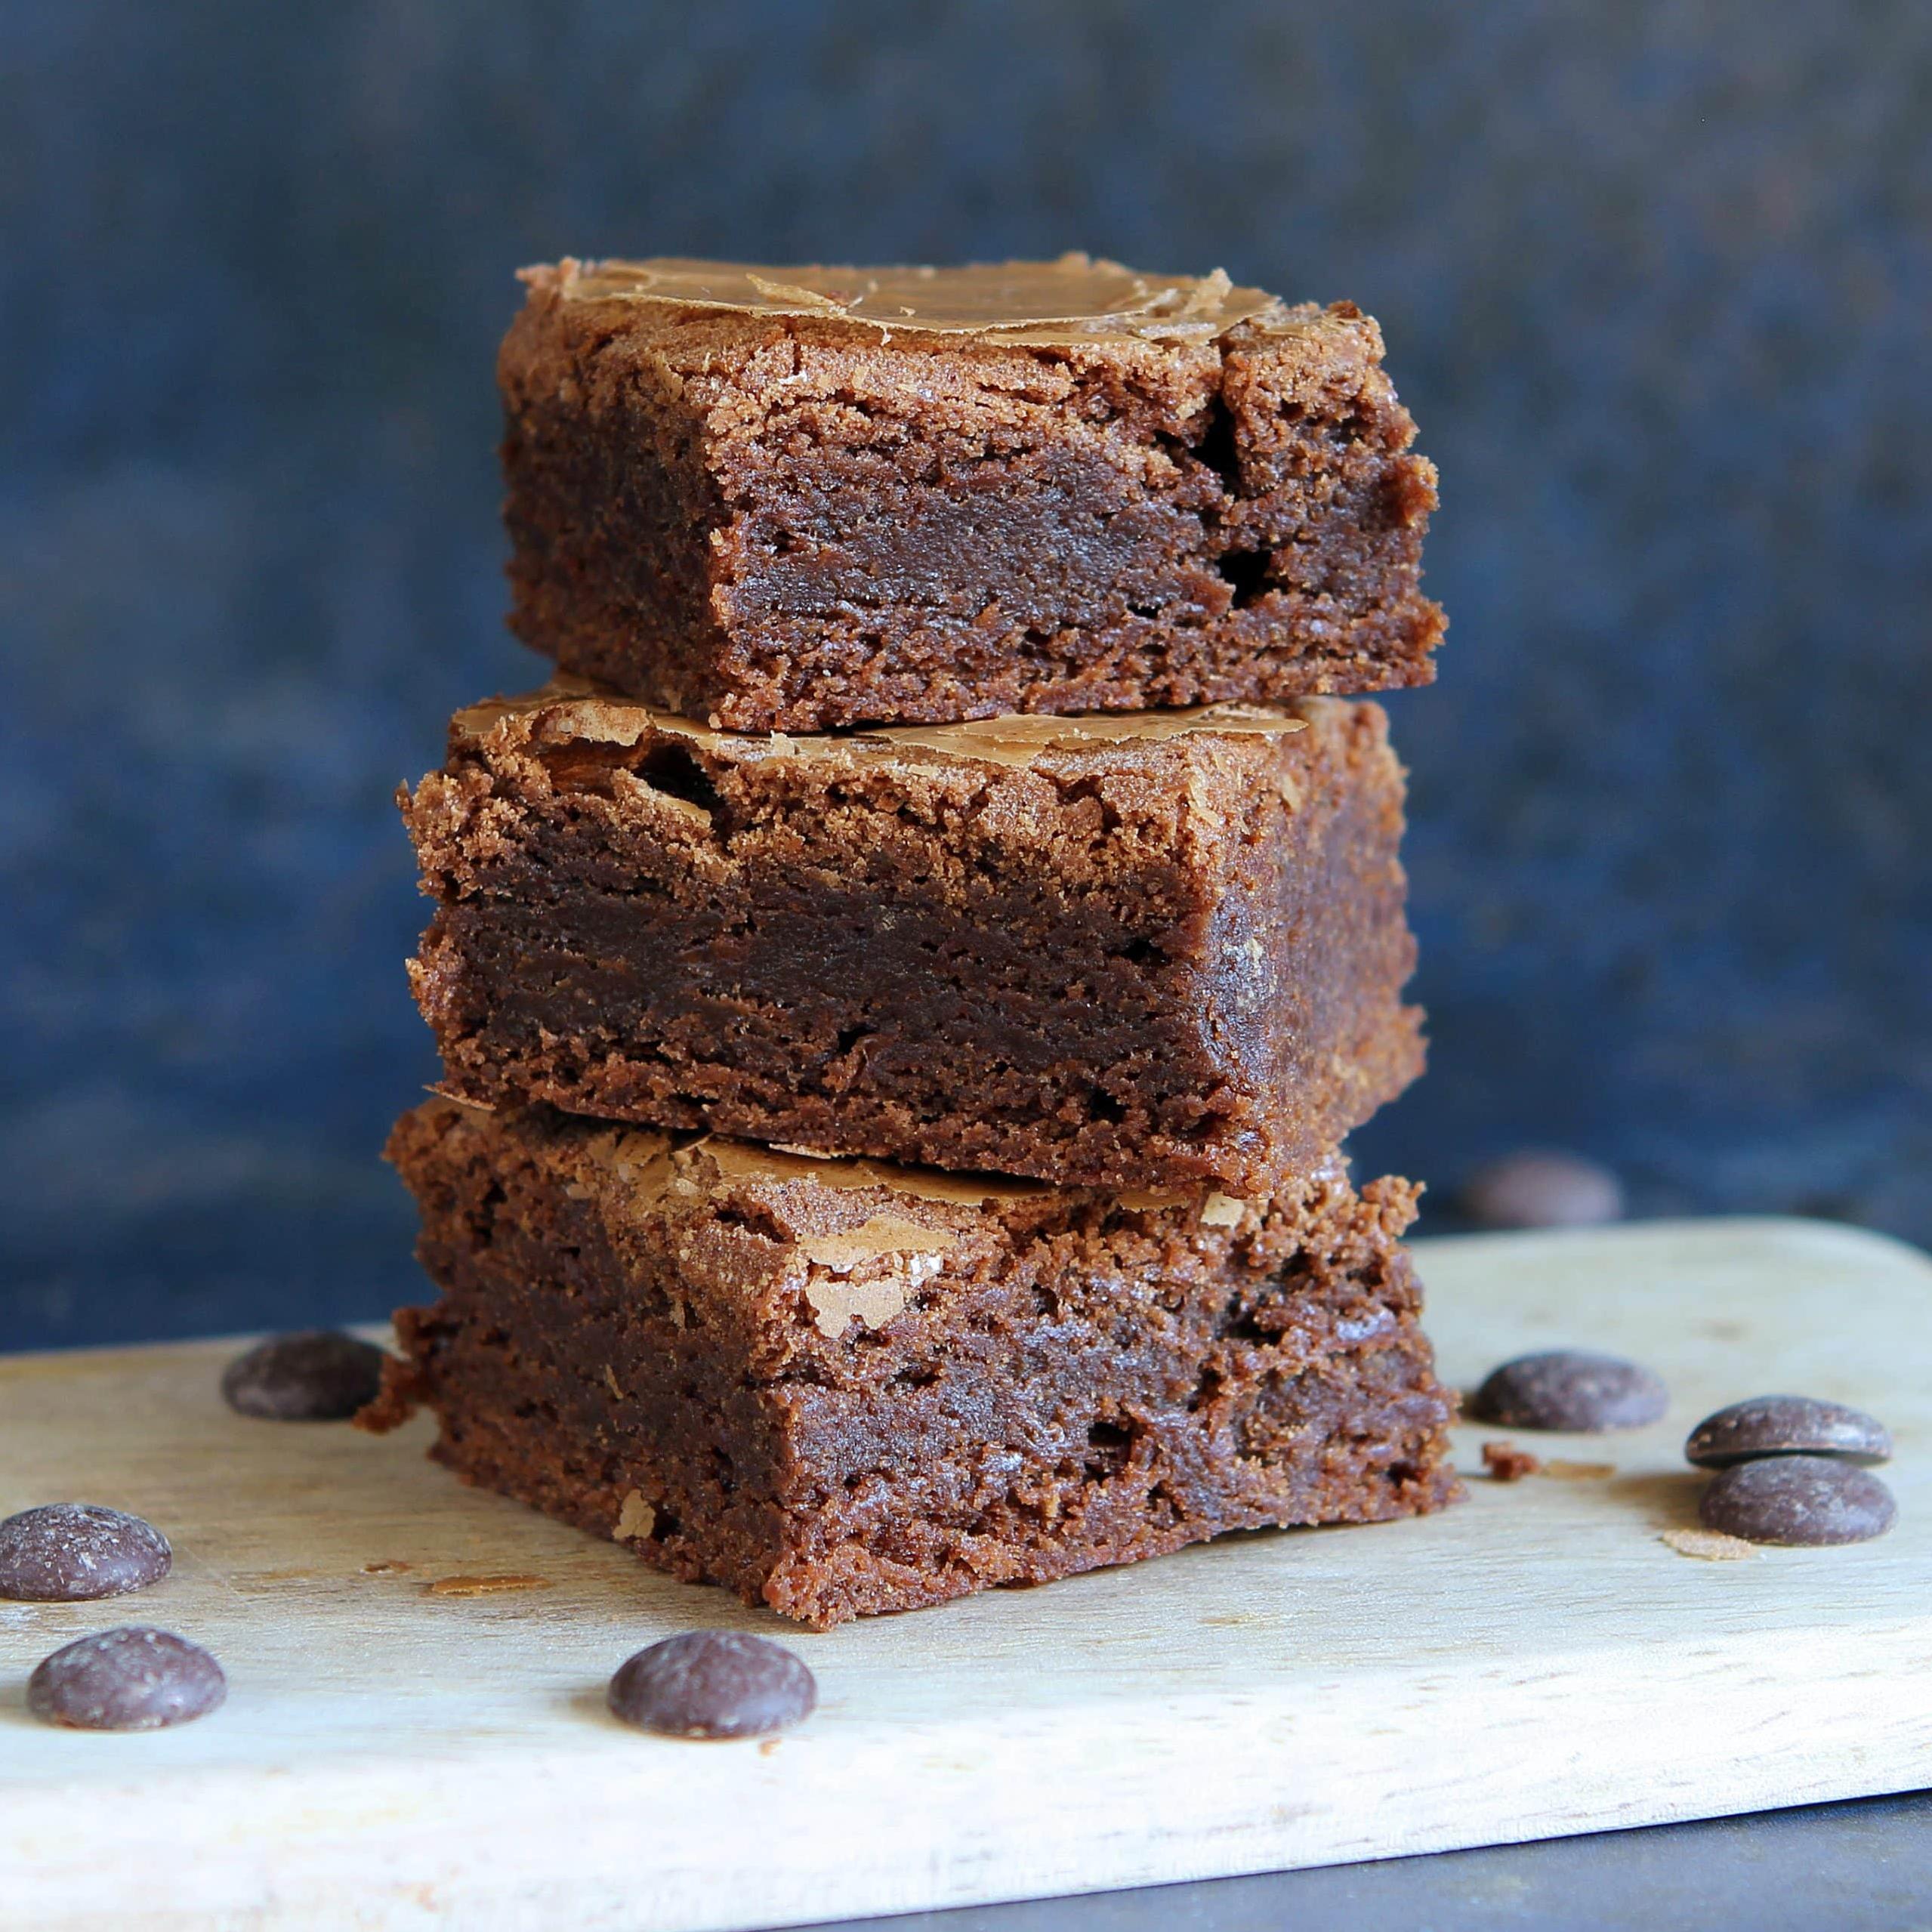  Delicious gluten-free brownies that will satisfy your chocolate cravings